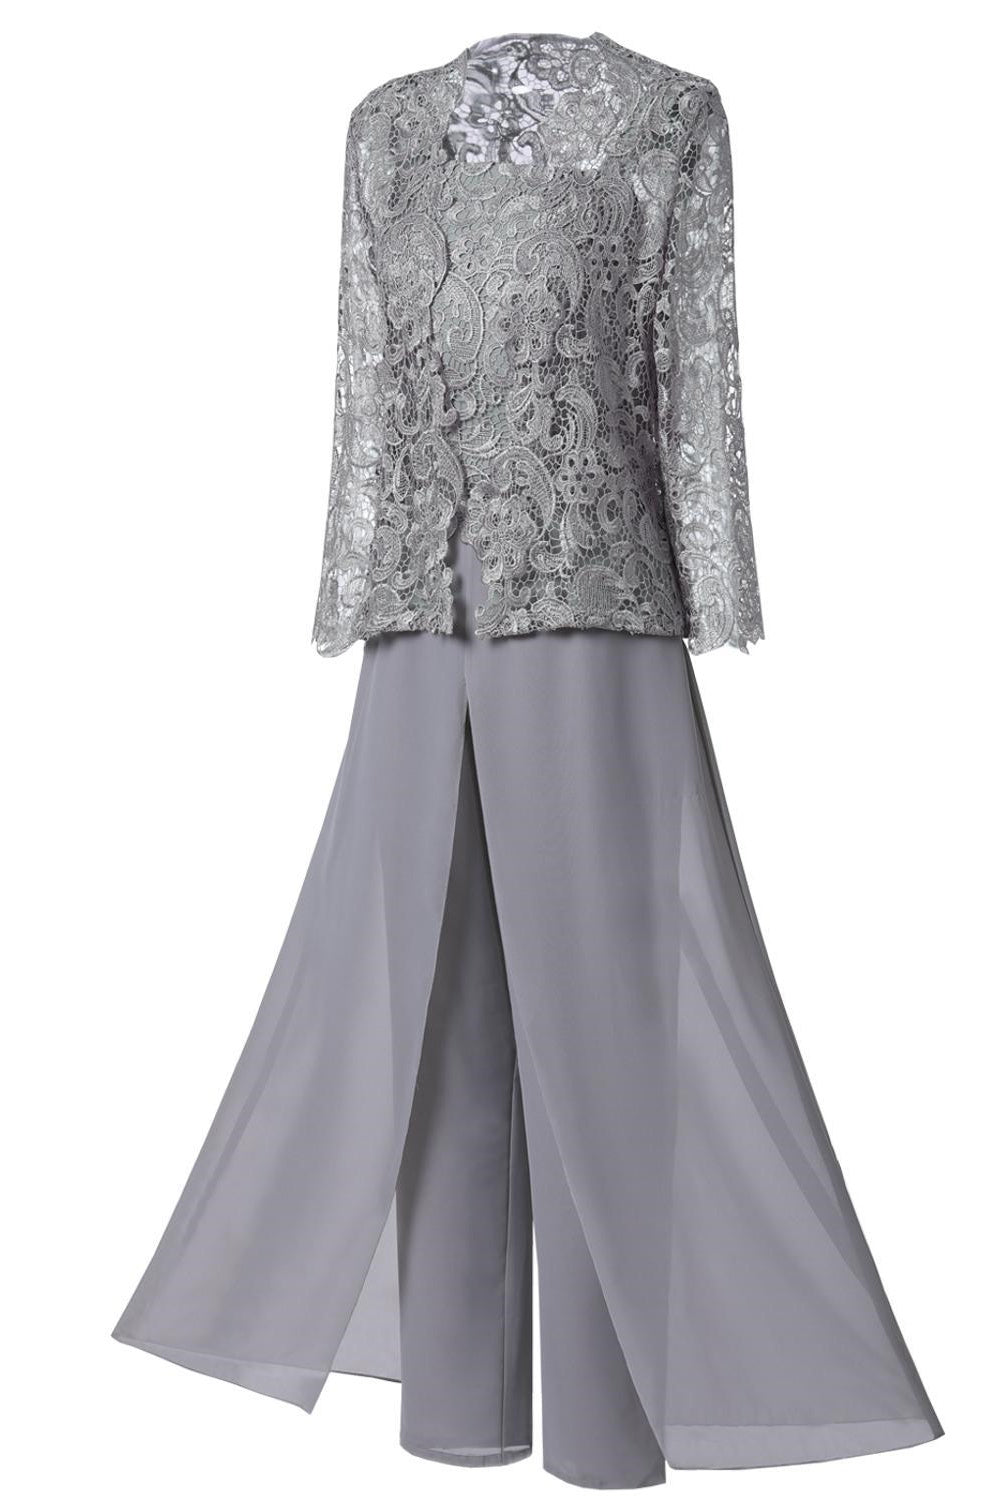 Grey Three-Piece Lace Mother of the Bride Pant Suits – Dreamdressy